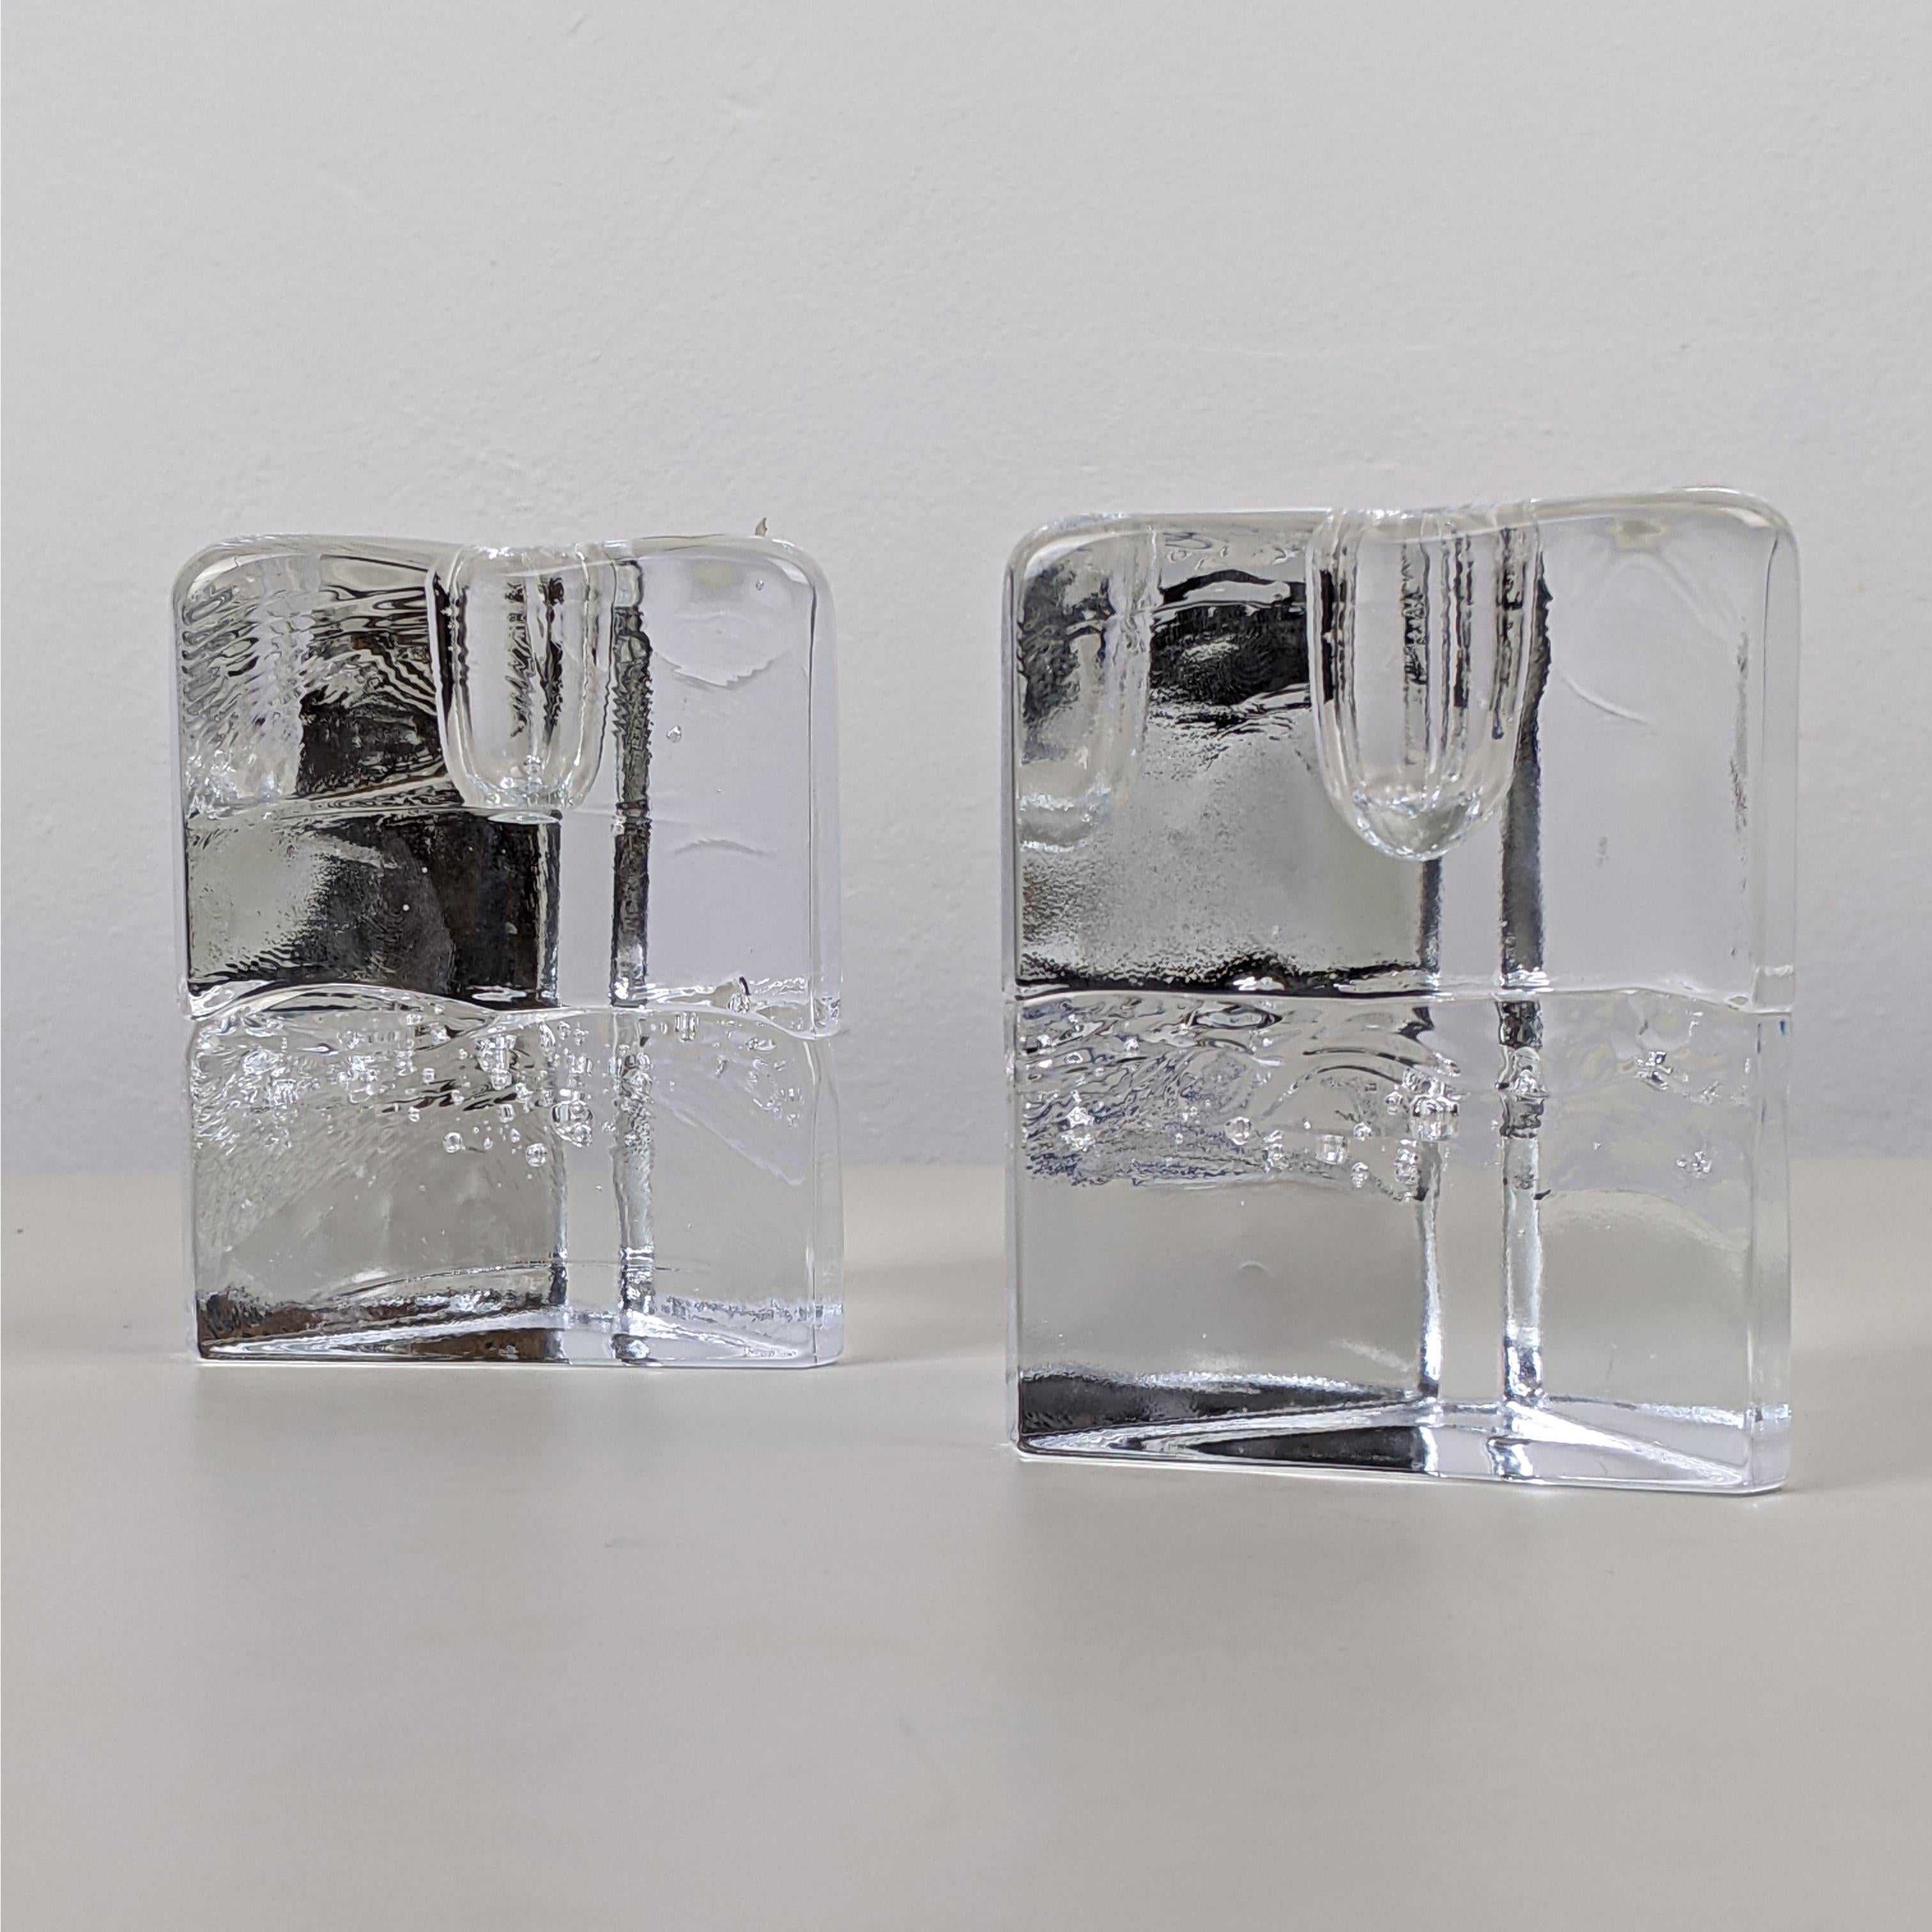 Timo Sarpaneva for Iittala, c. 1970
‘Arkipelago’ triangle candle holders, pair 

Clear blown glass
Excellent condition

Dimensions, each approx..:
w 7cm, h 8.7cm, weight 550g.